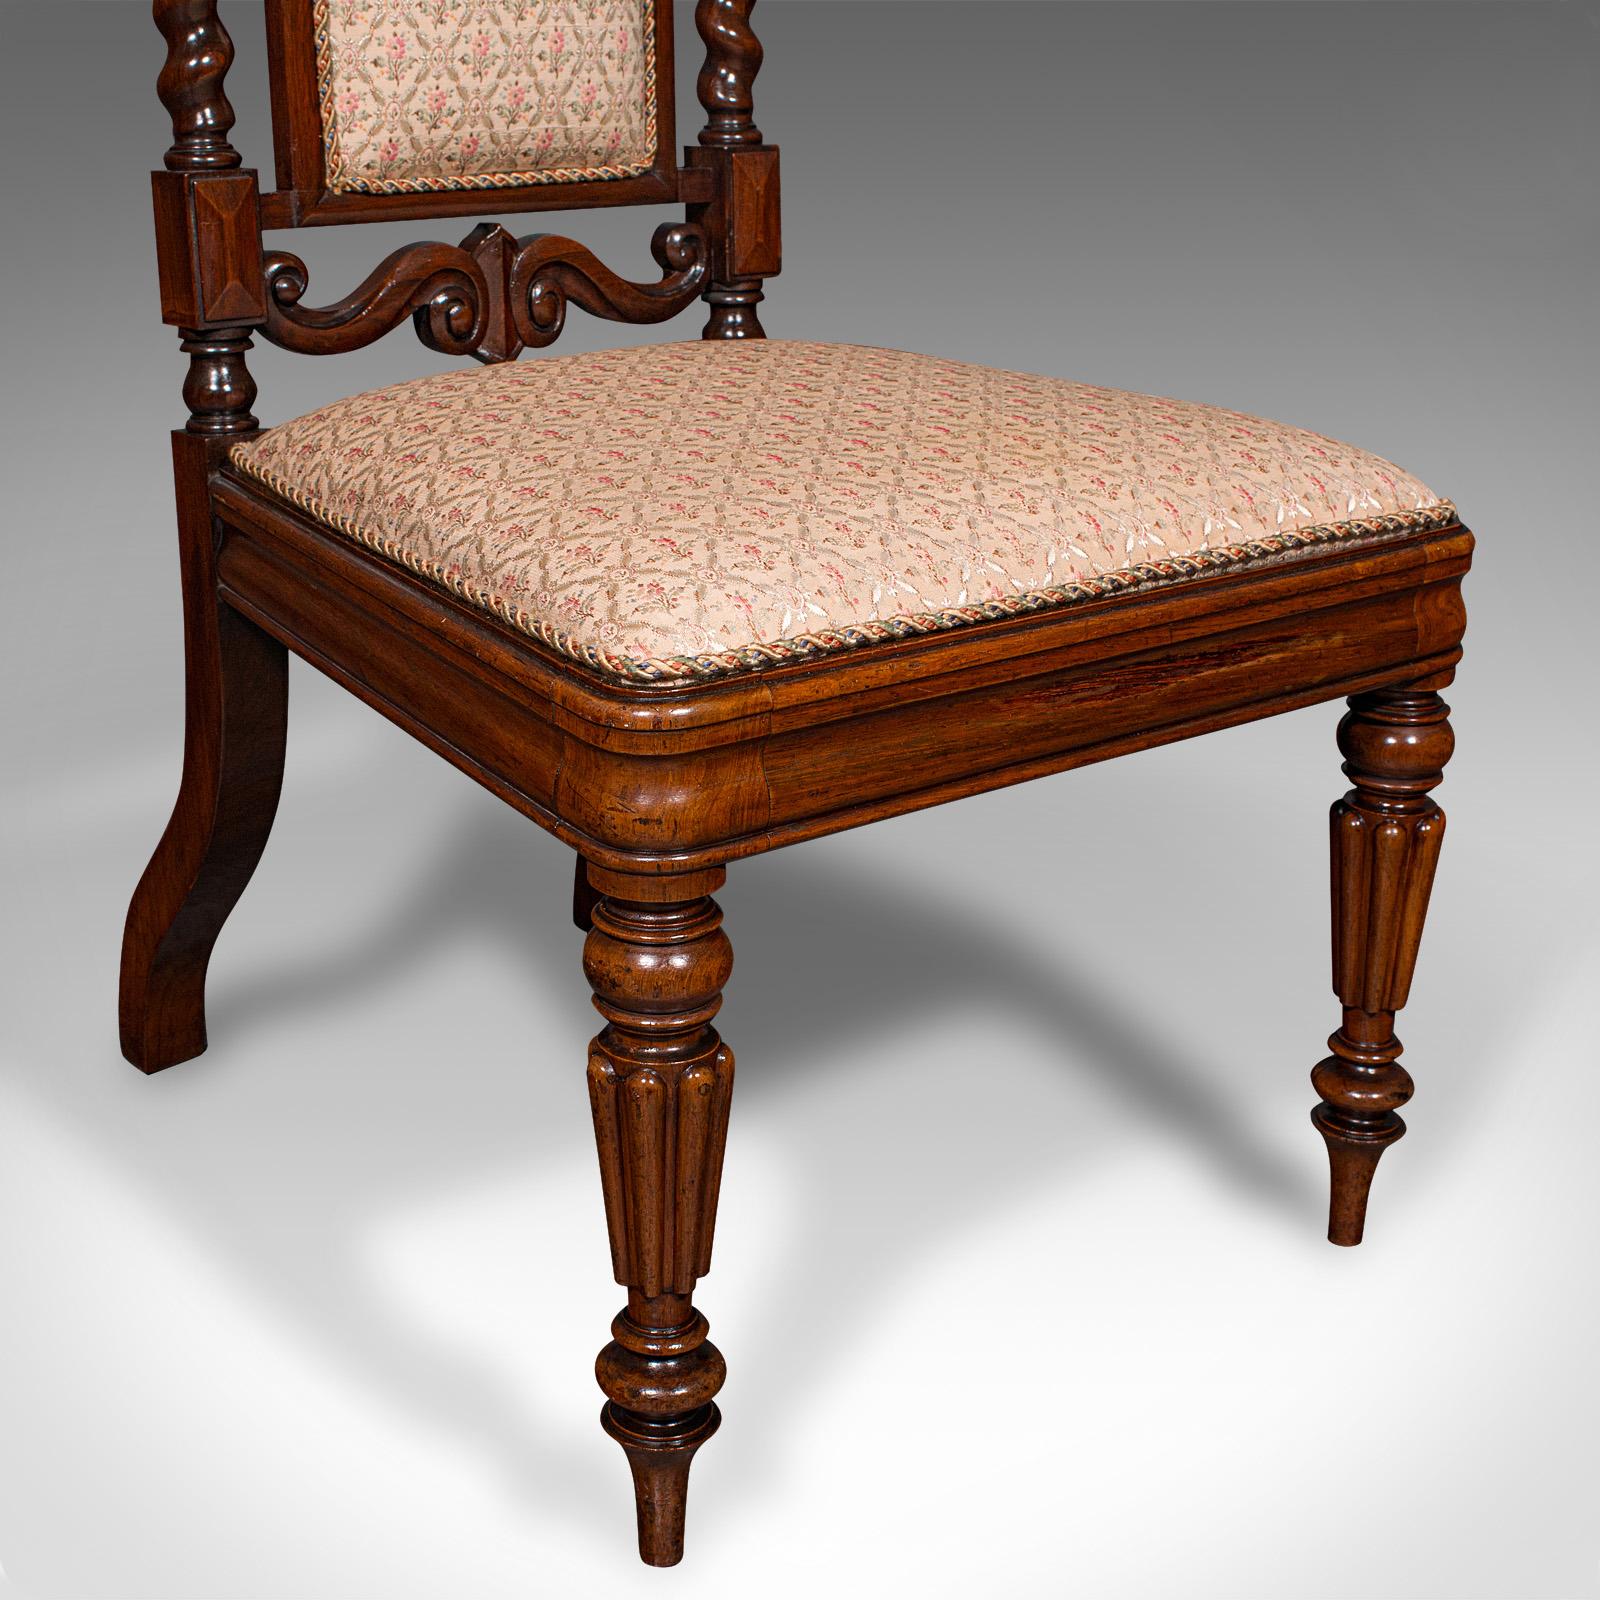 Antique Morning Room Chair, English, Silk Cotton, Side Seat, William IV, C.1835 For Sale 6